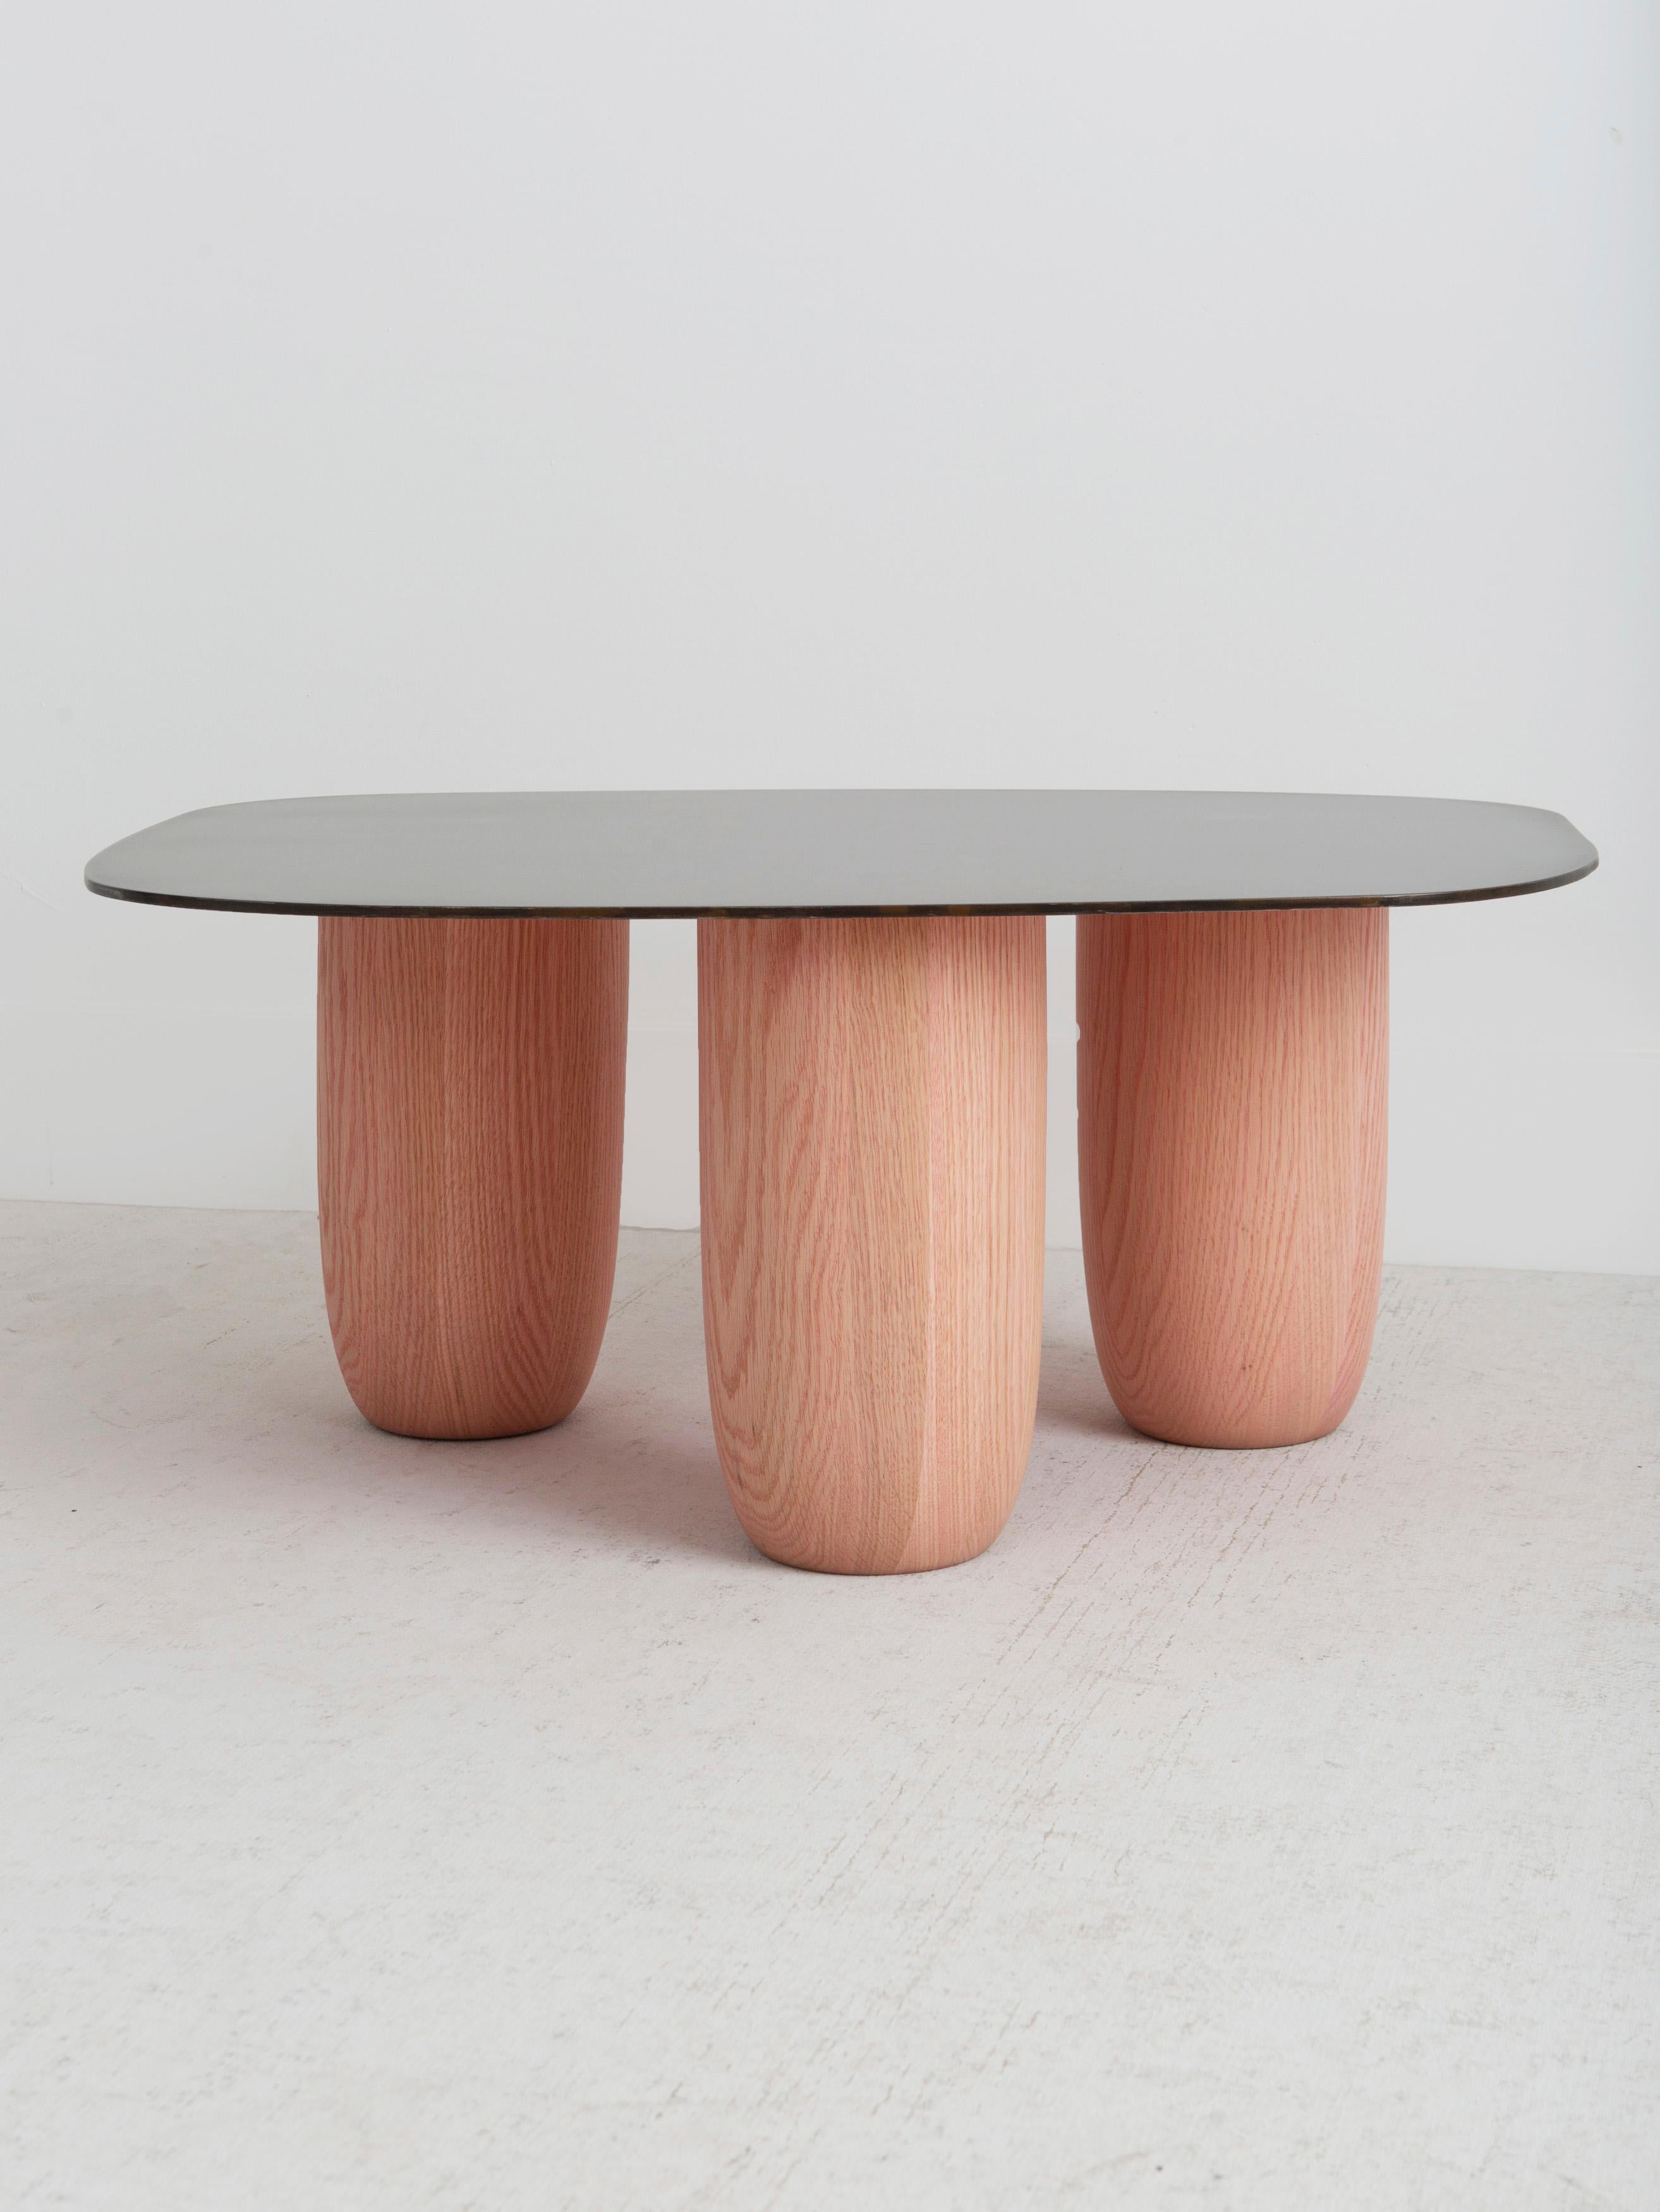 Contemporary Patinated Steel and Solid Oak Low Tables by Vivian Carbonell For Sale 2